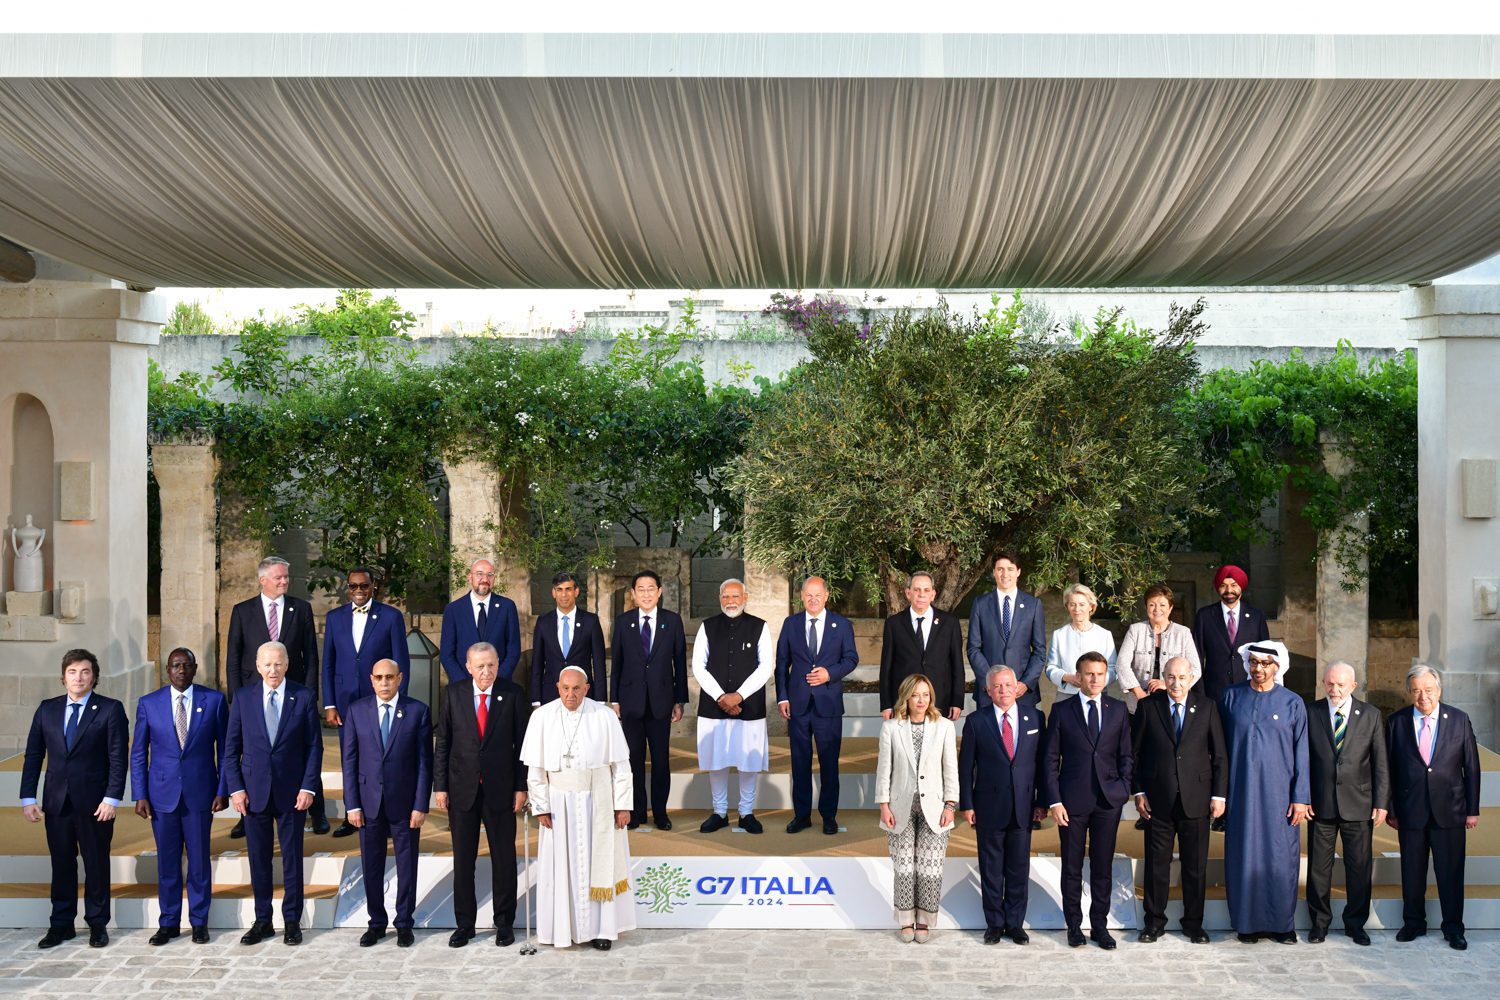 G7 Summit: World Leaders Pose for ‘Outreach Nation’ Session Family Photo